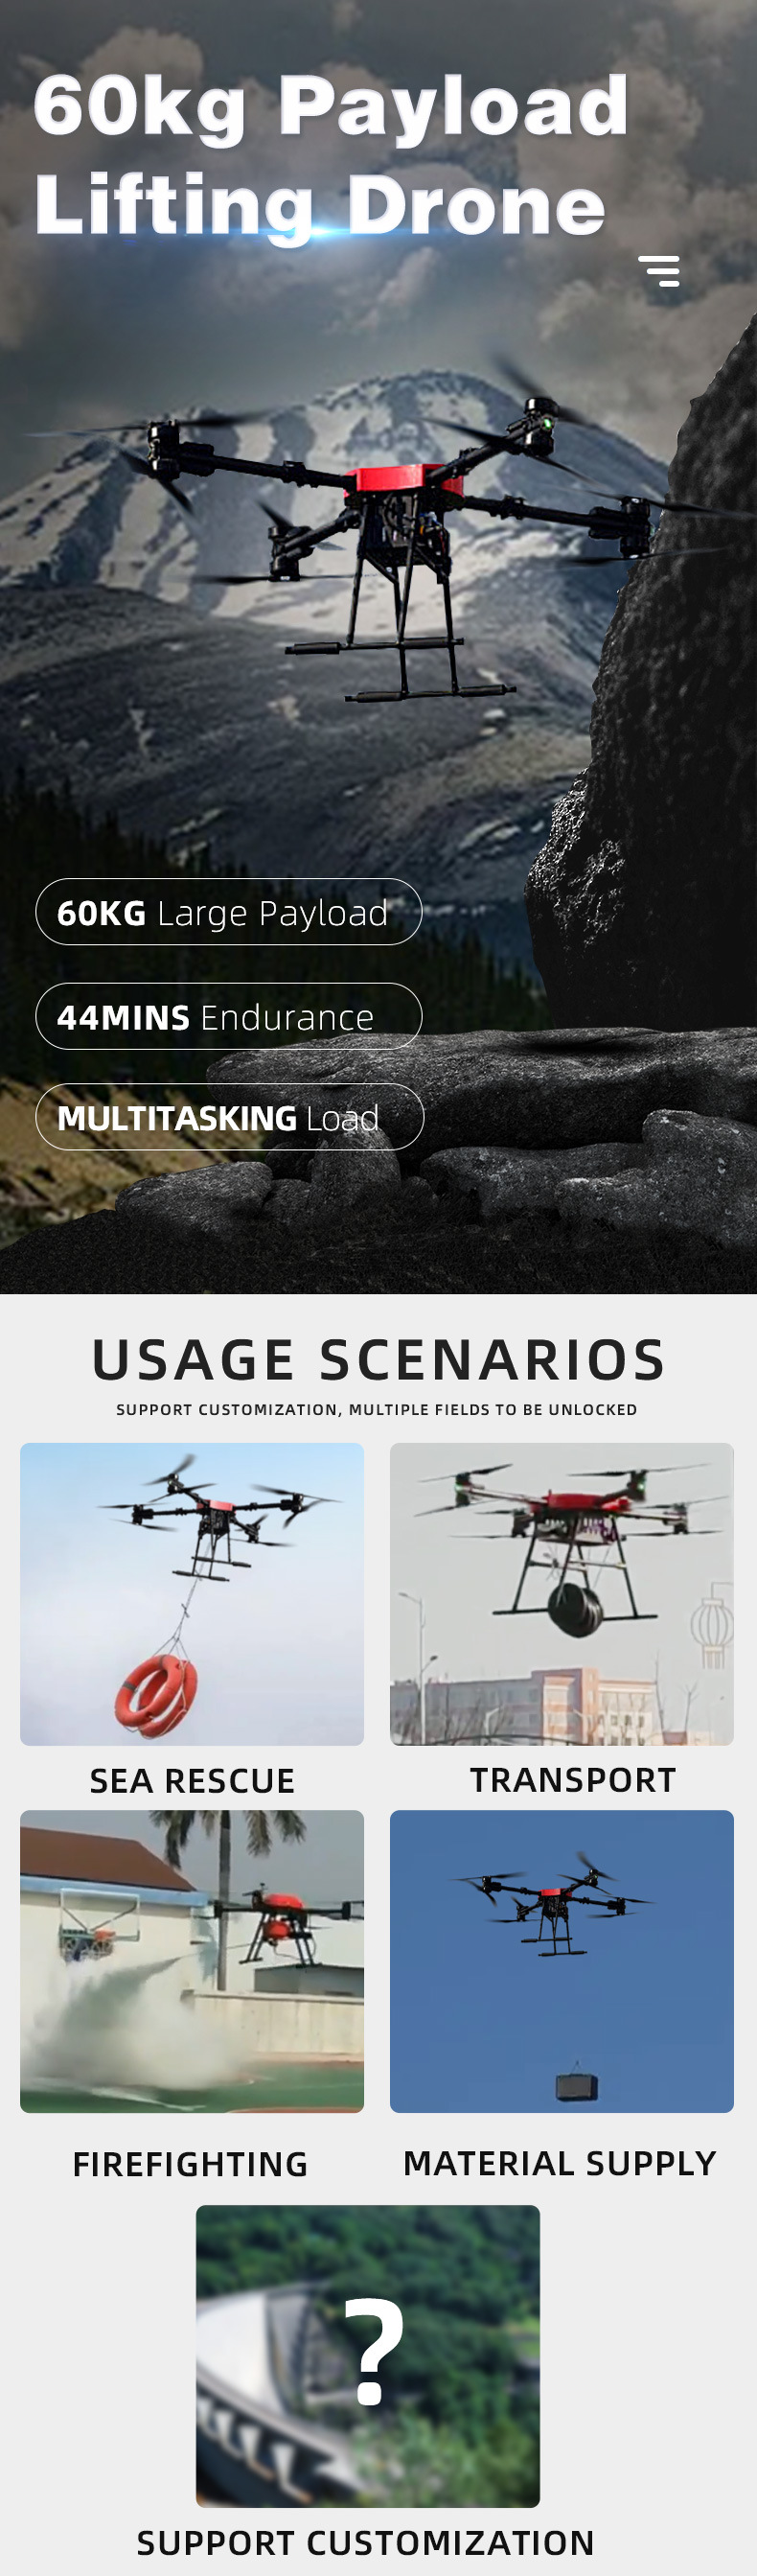 Route Planning Image Return Optional Pods High Flight Altitude Heavy 60kg Payload Industrial Drone